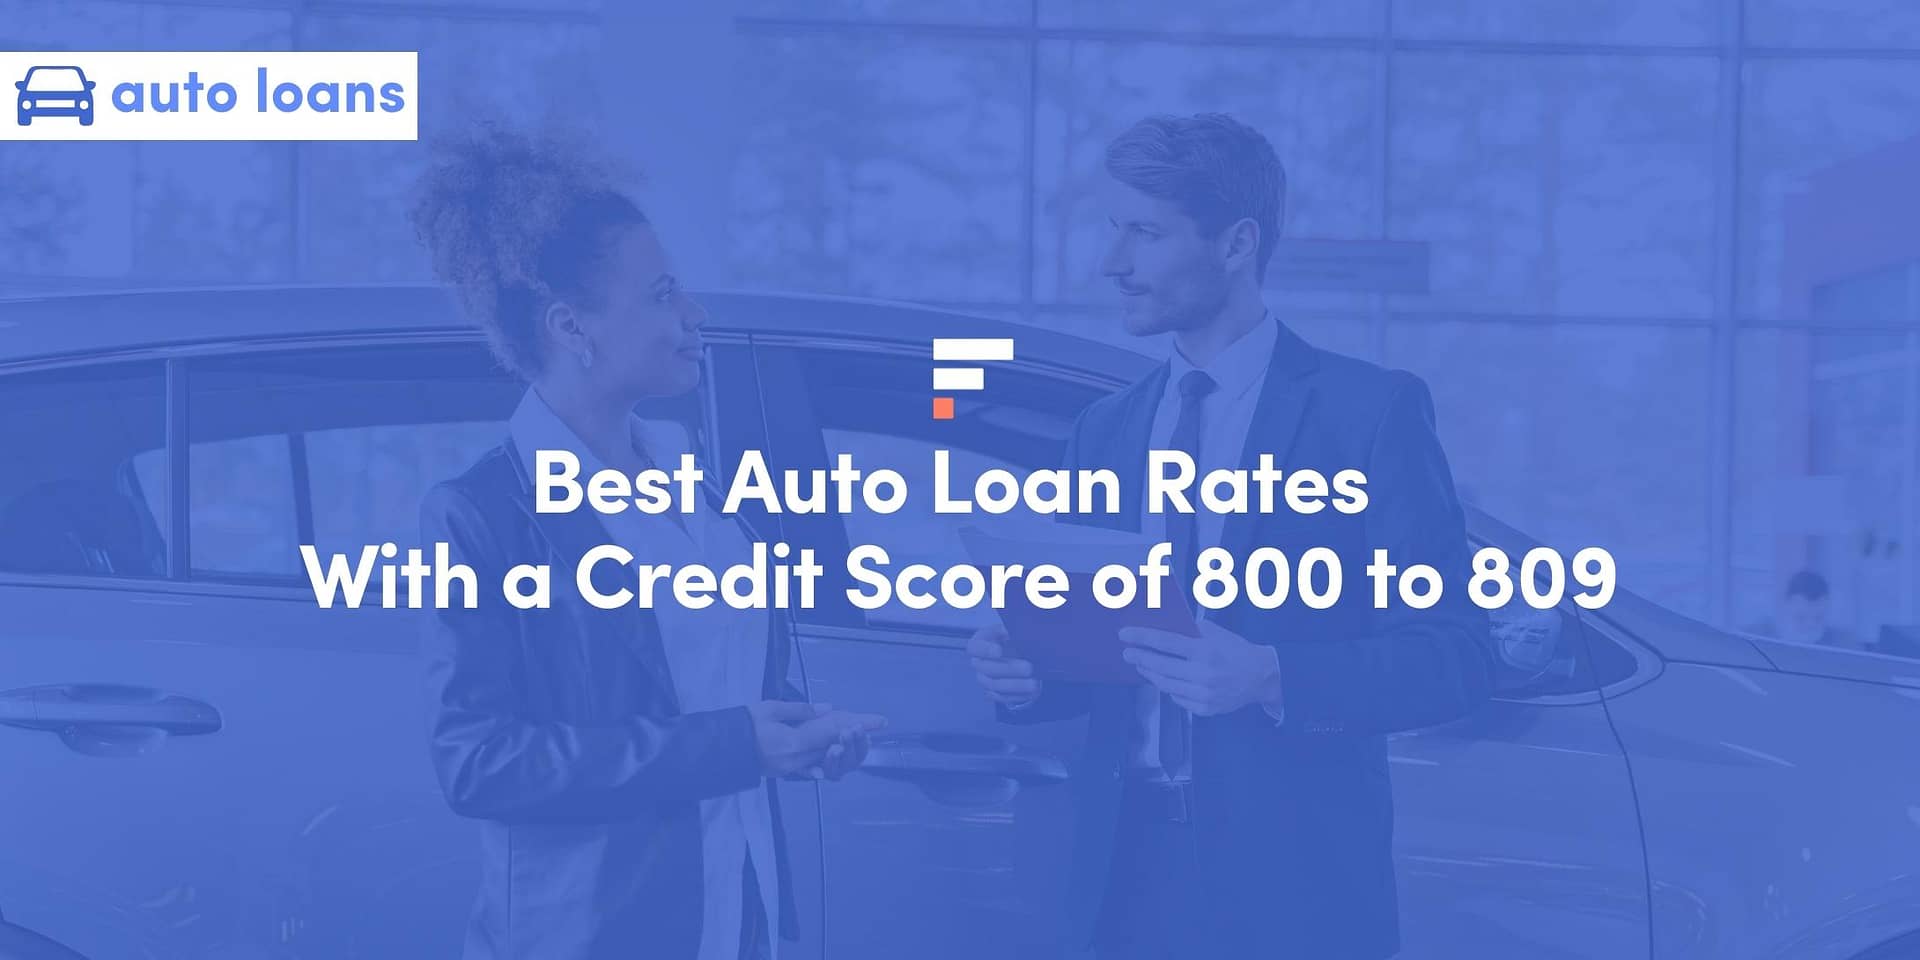 Best Auto Loan Rates With a Credit Score of 800 to 809